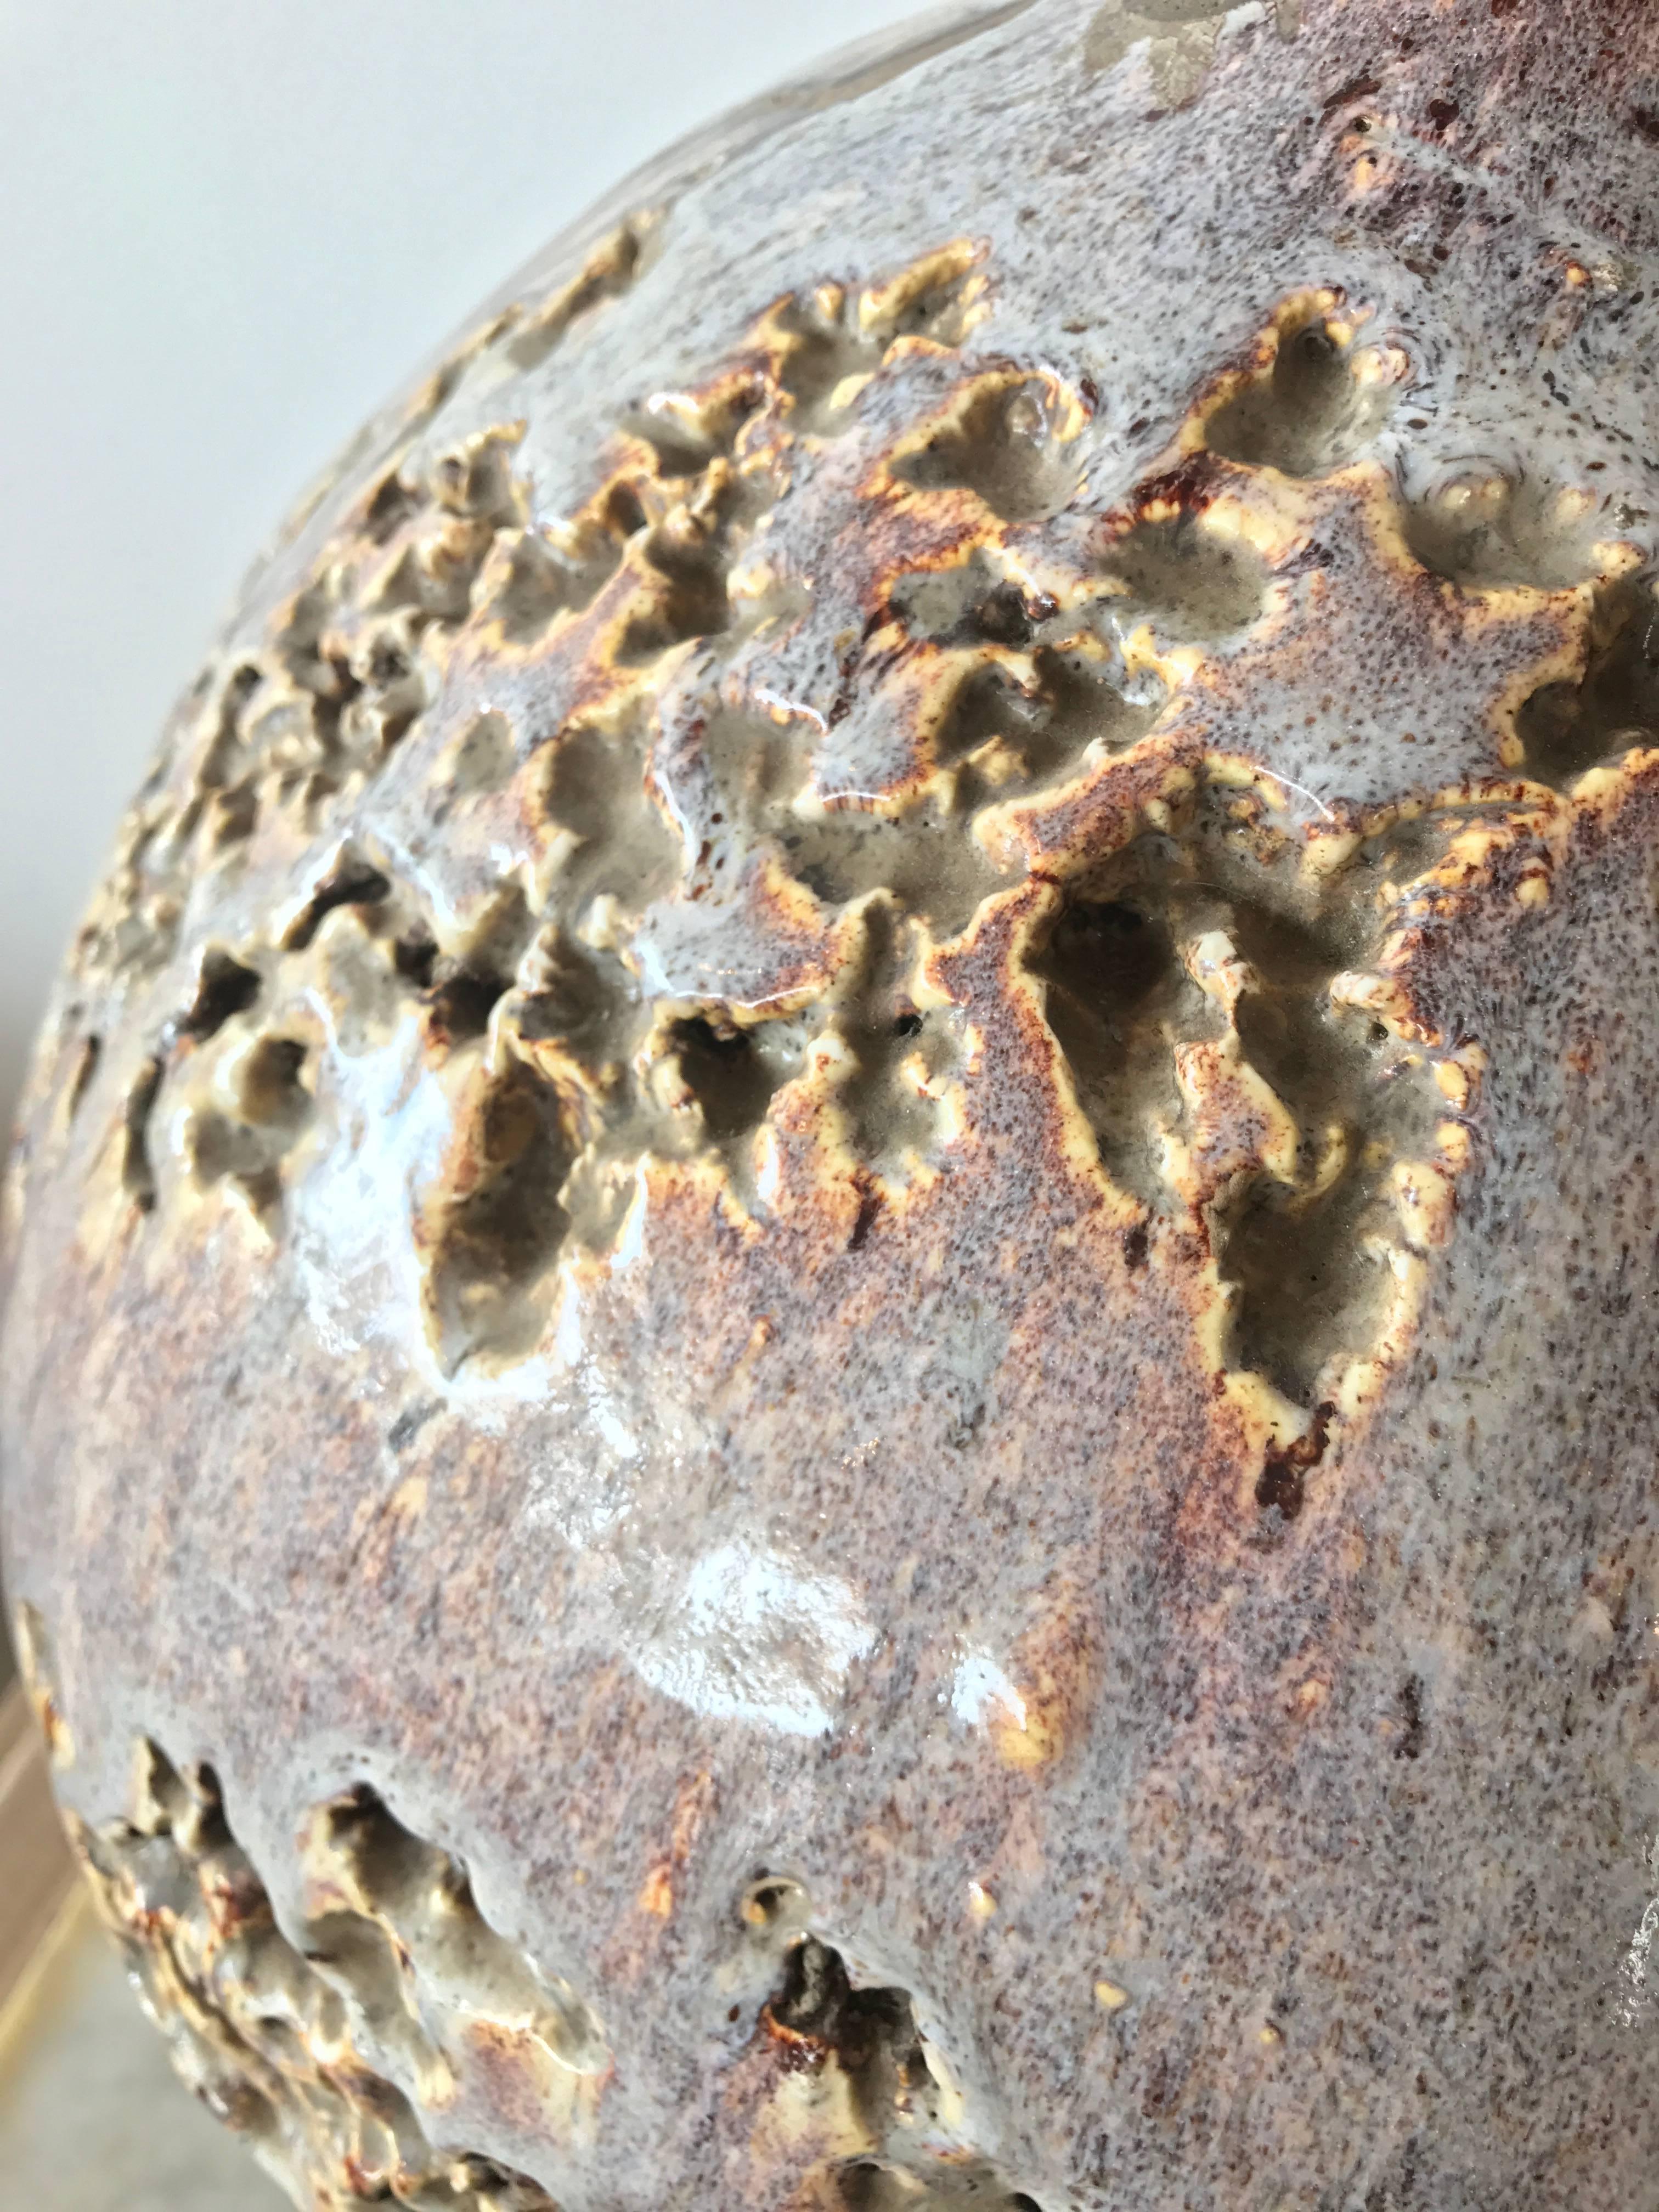 Wonderfully textured spherical ceramic lamp featuring clusters of organically formed pockets and chambers across the surface as well as variation in the glaze density. The focal color is a soft mauve with shades of lavender, lilac, charcoal gray,